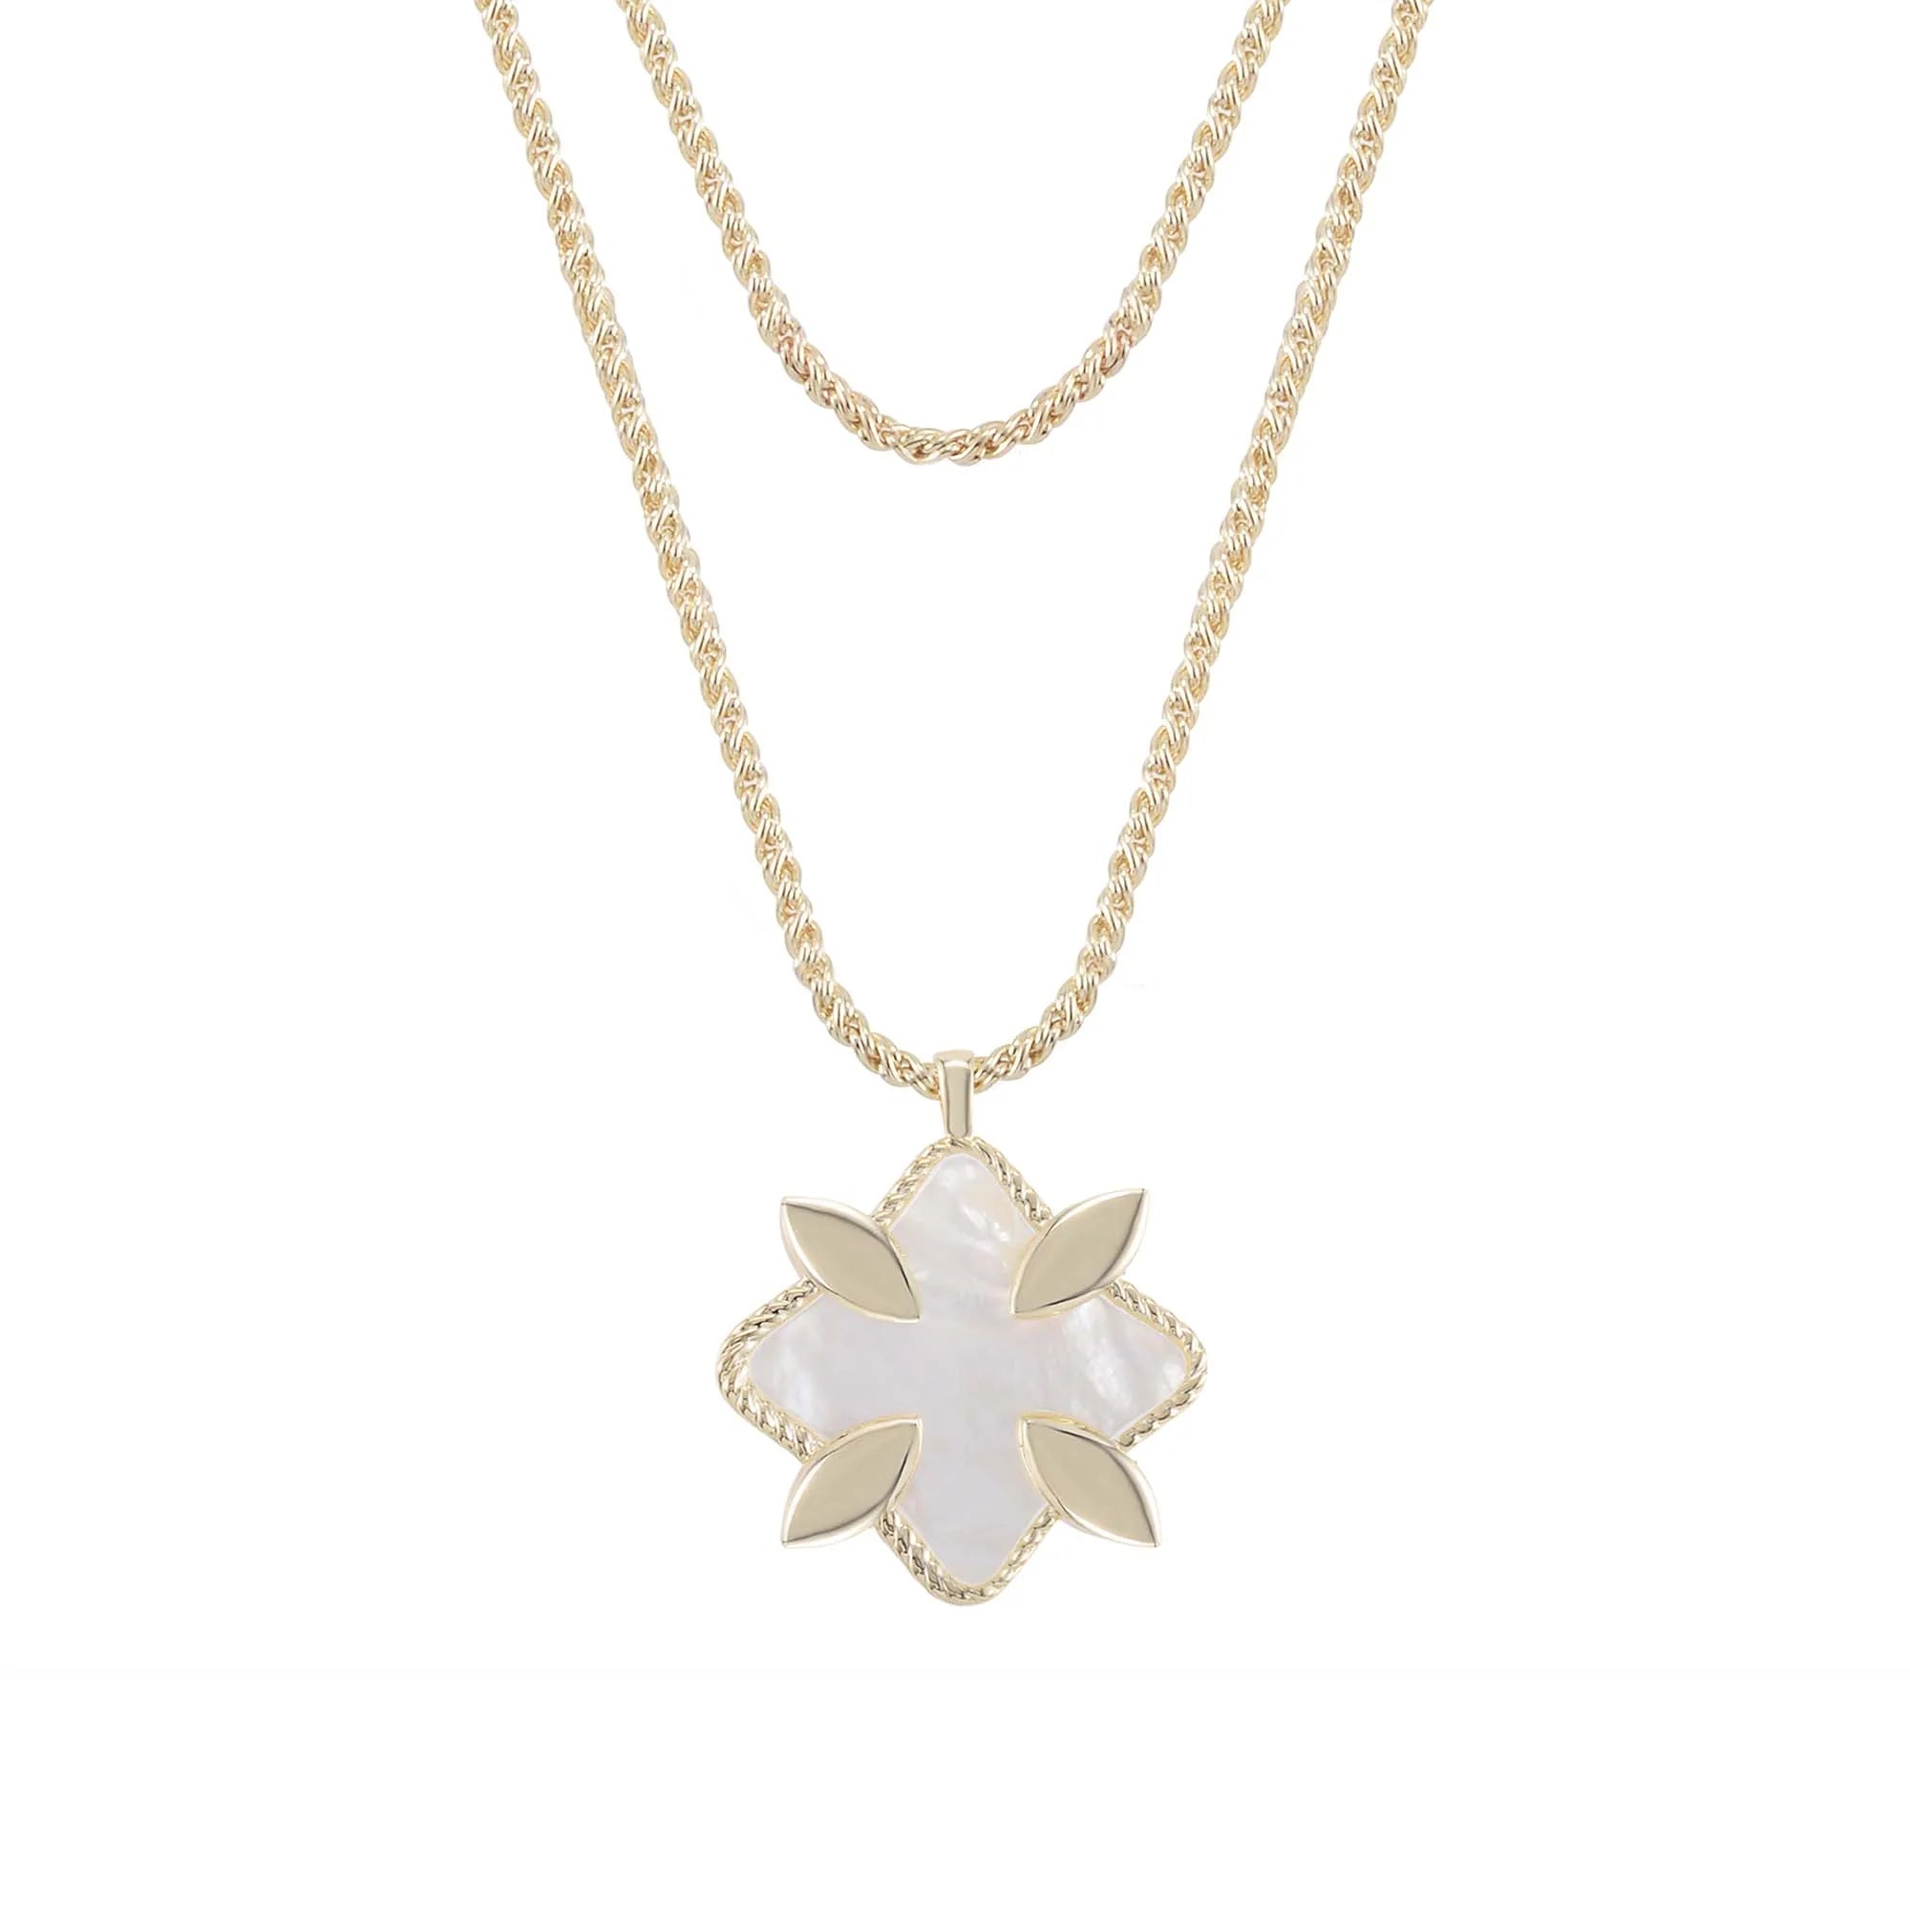 Natalie Wood - Grace Stone Pendant Necklace in Ivory Pearl/Gold-110 Jewelry & Hair-Natalie Wood-July & June Women's Fashion Boutique Located in San Antonio, Texas